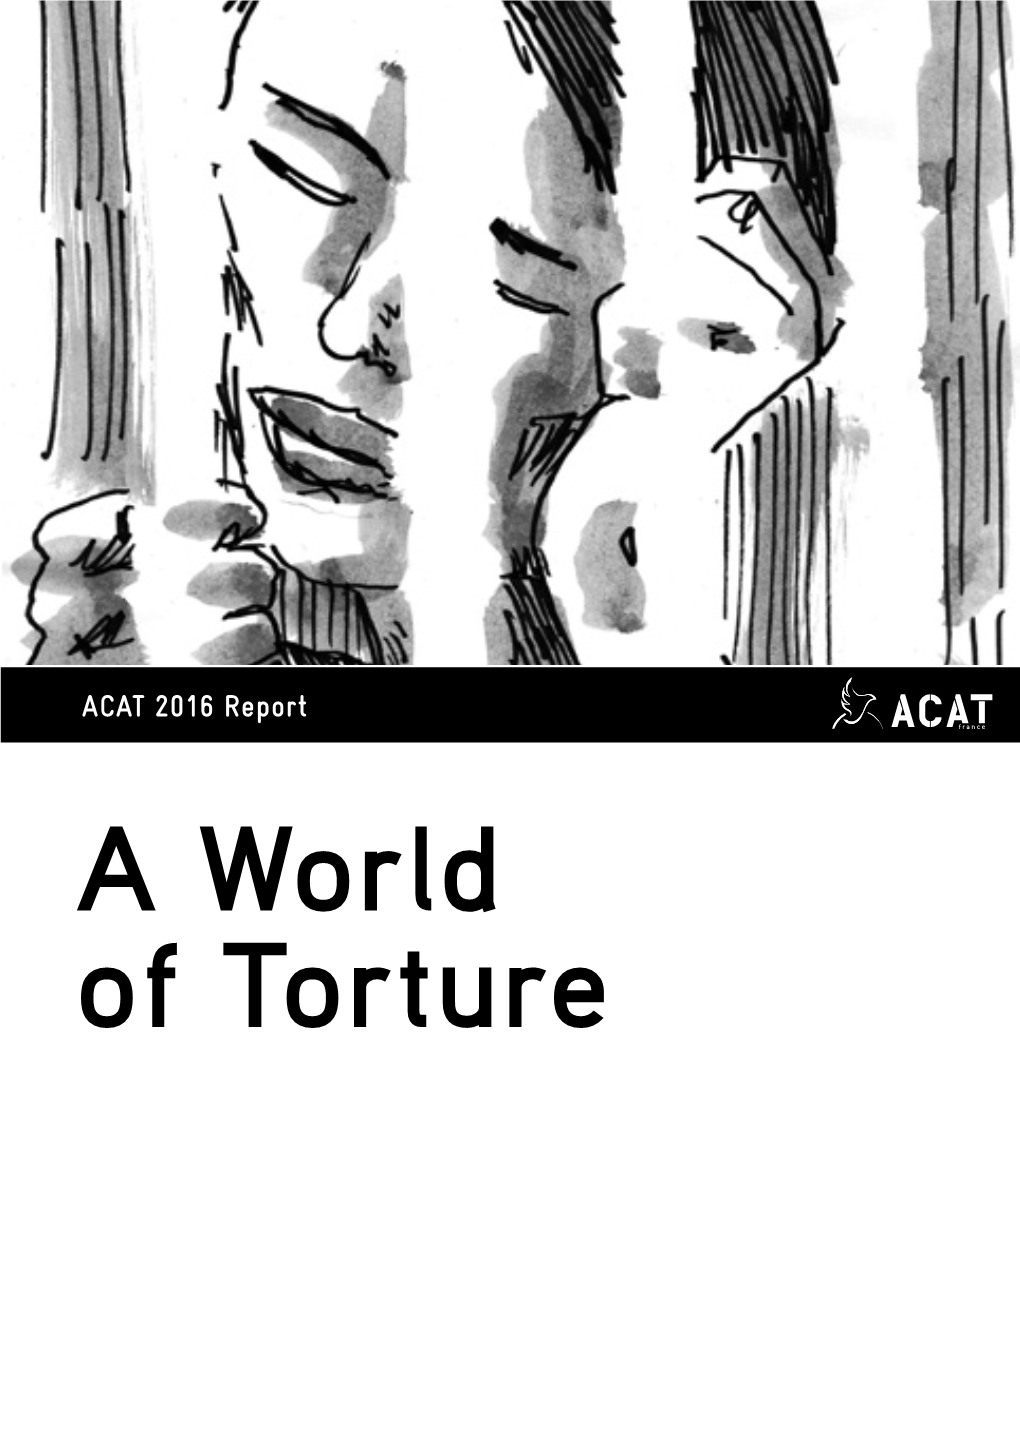 A World of Torture " Torture Does Not Merely Aim to Hurt, It Aims to Destroy a Person to Create a Being Far Removed from the Human Species."